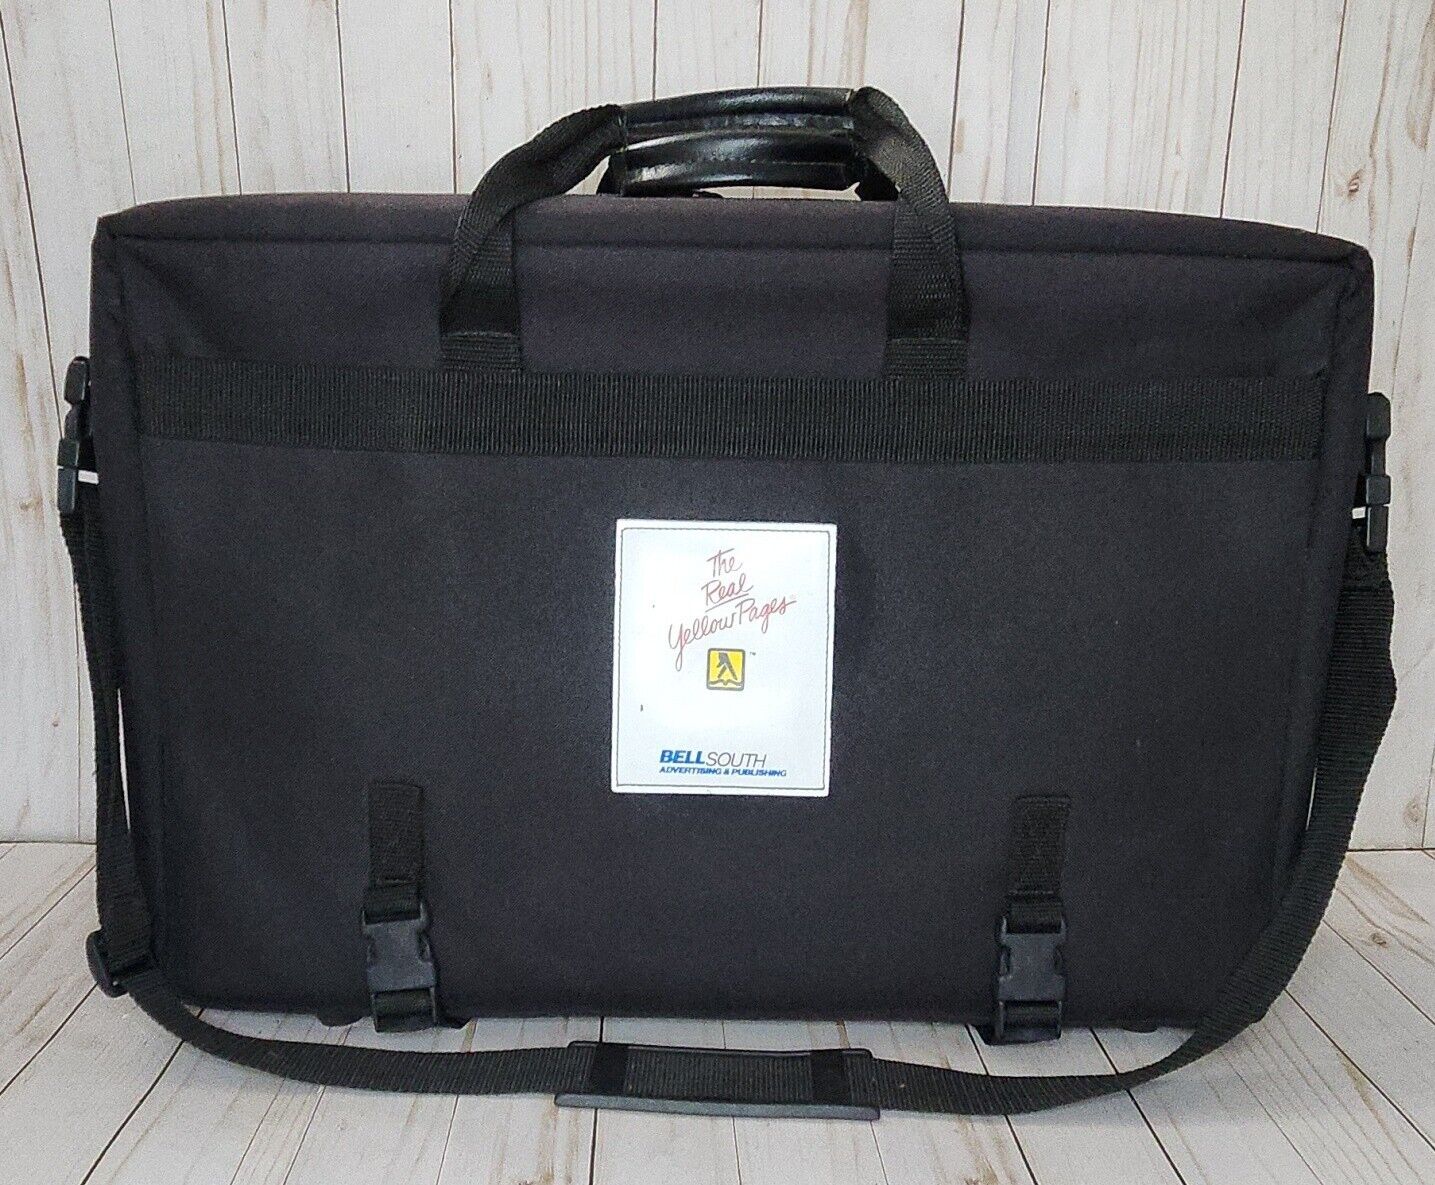 VTG InfoCase Top Loading Black Canvas Briefcase Bag BELLSOUTH Yellowpages RARE